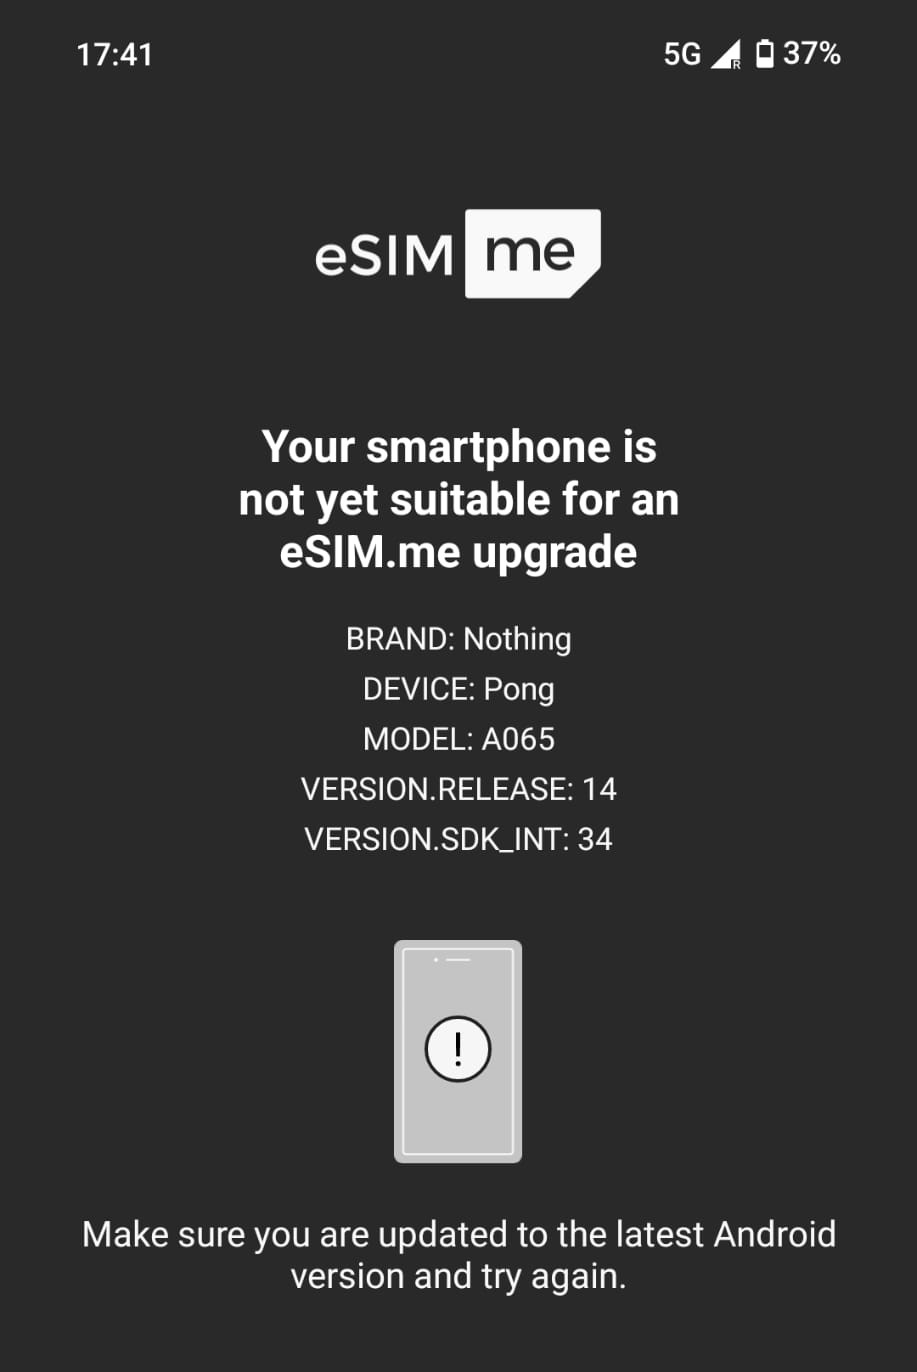 esim.me is not supported